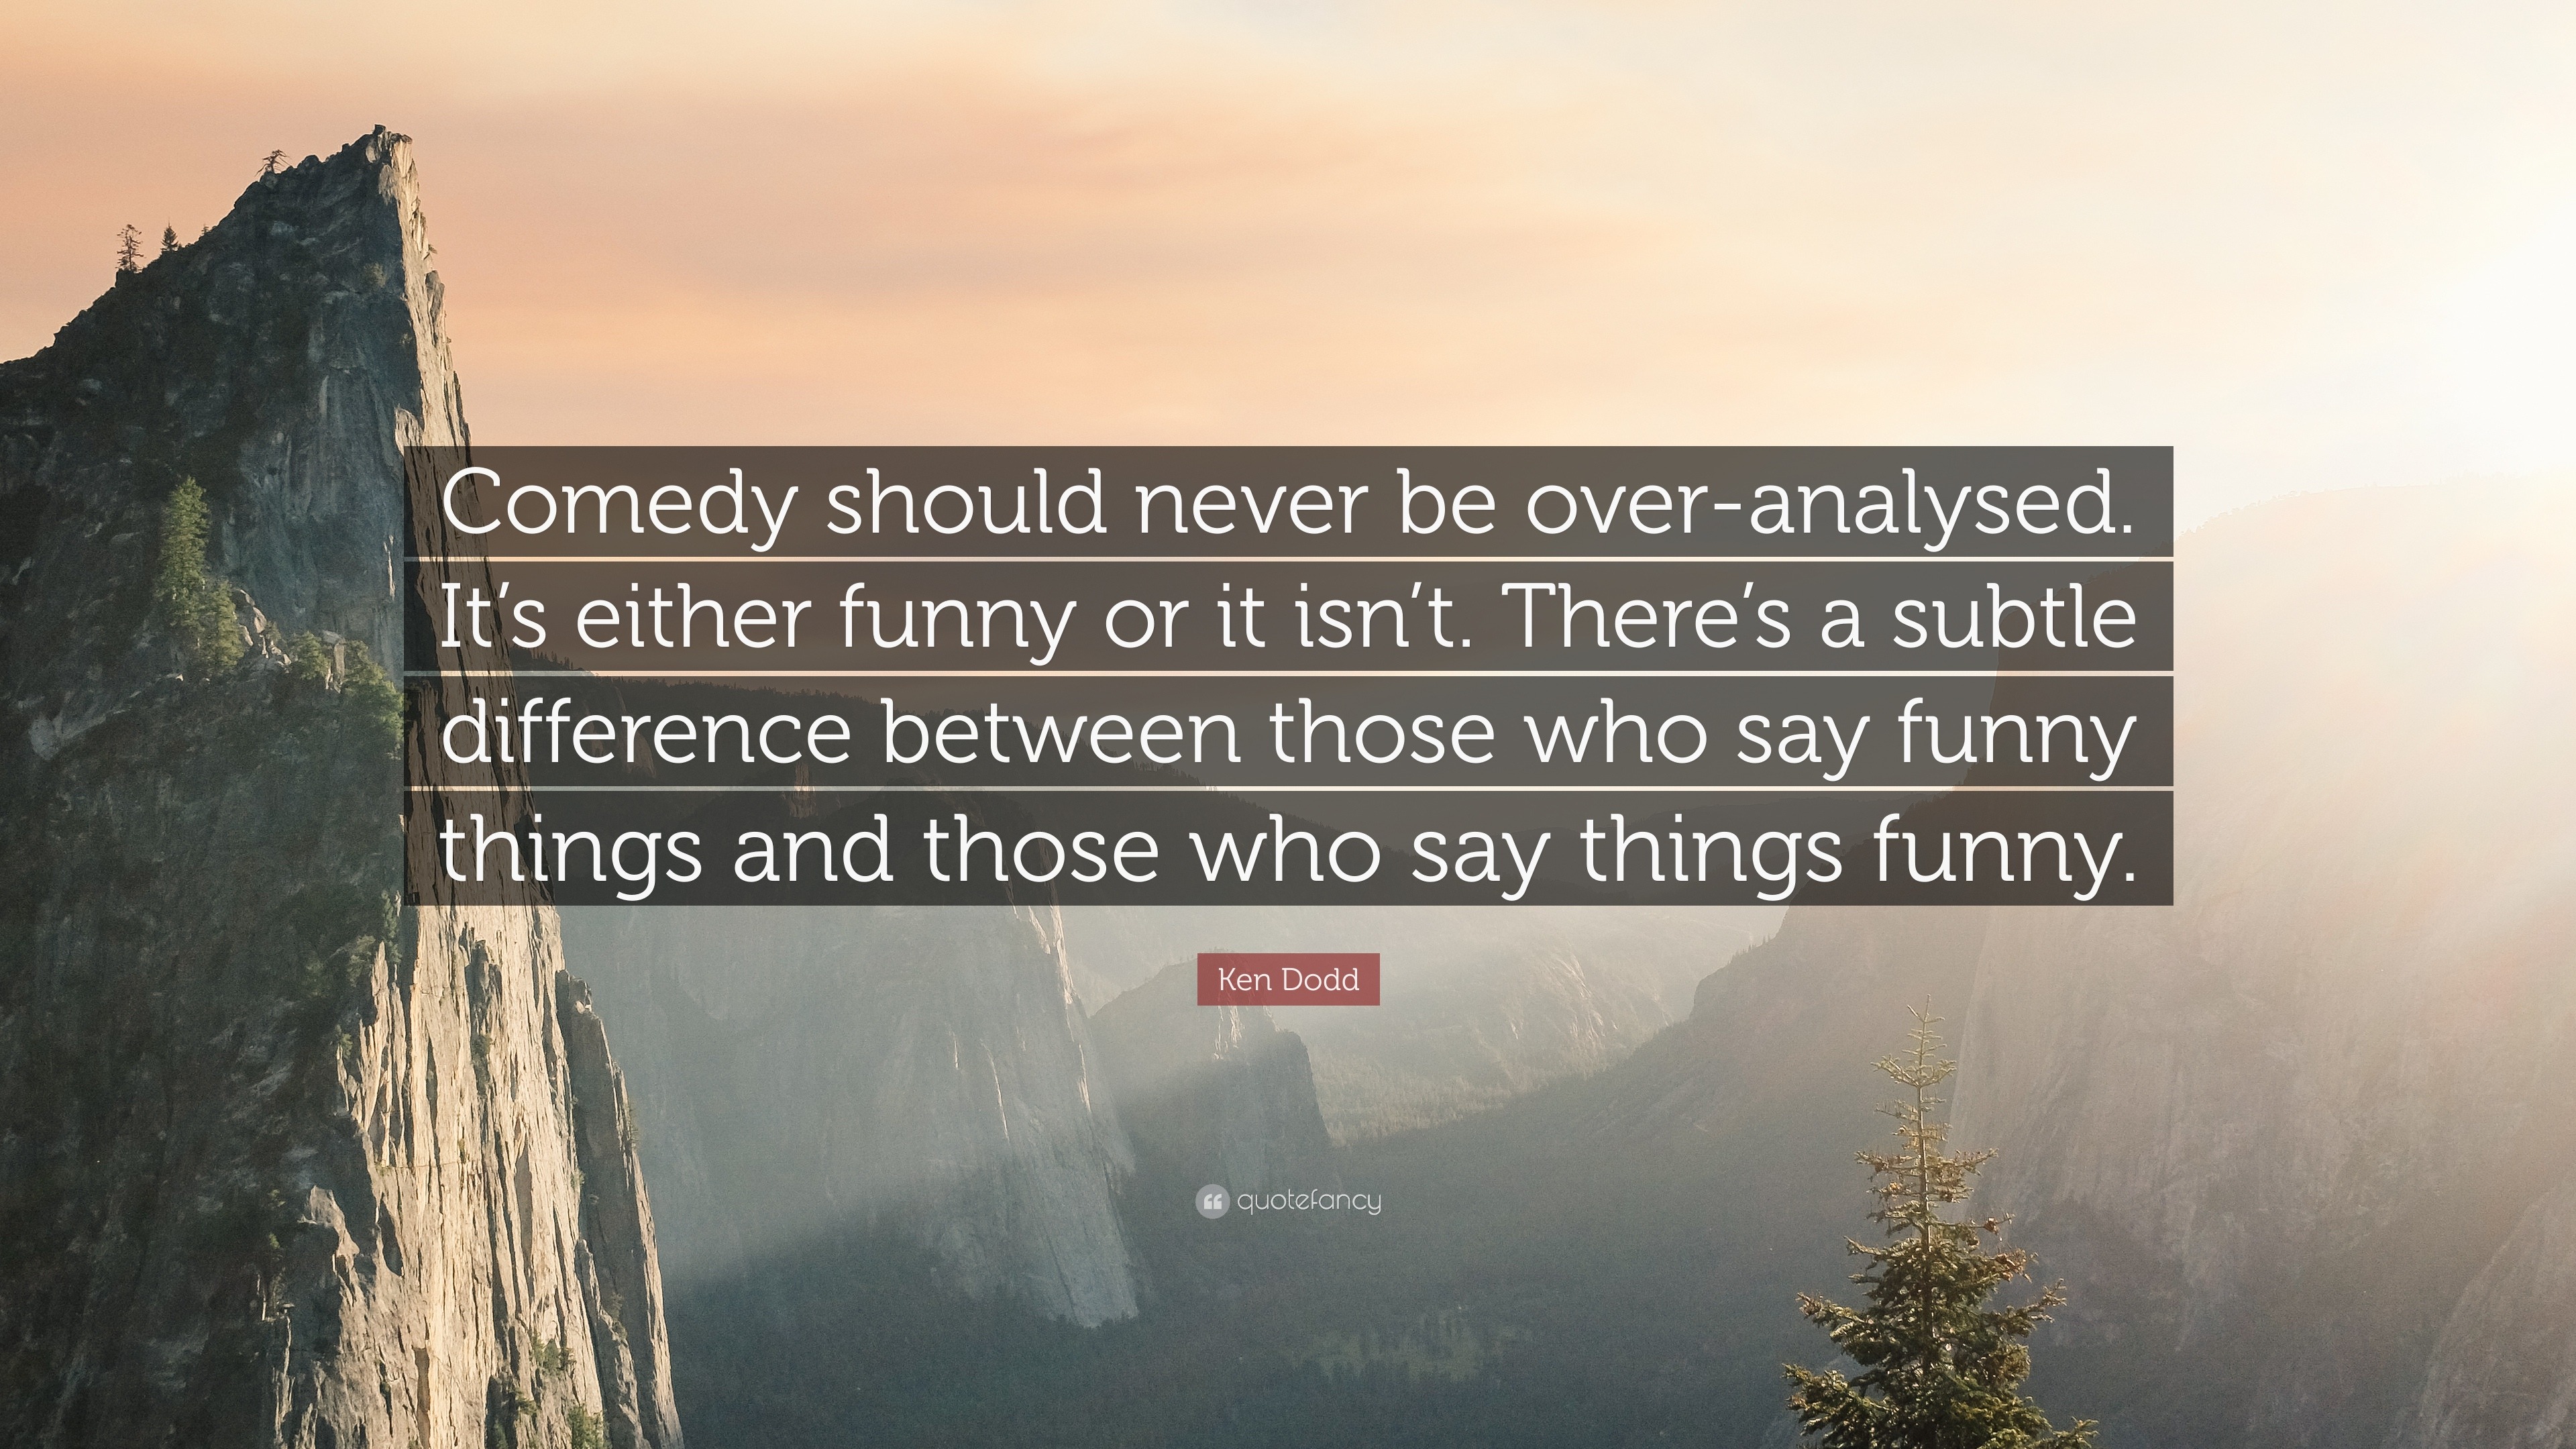 Ken Dodd Quote: “Comedy should never be over-analysed. It's either funny or  it isn't. There's a subtle difference between those who say f...”